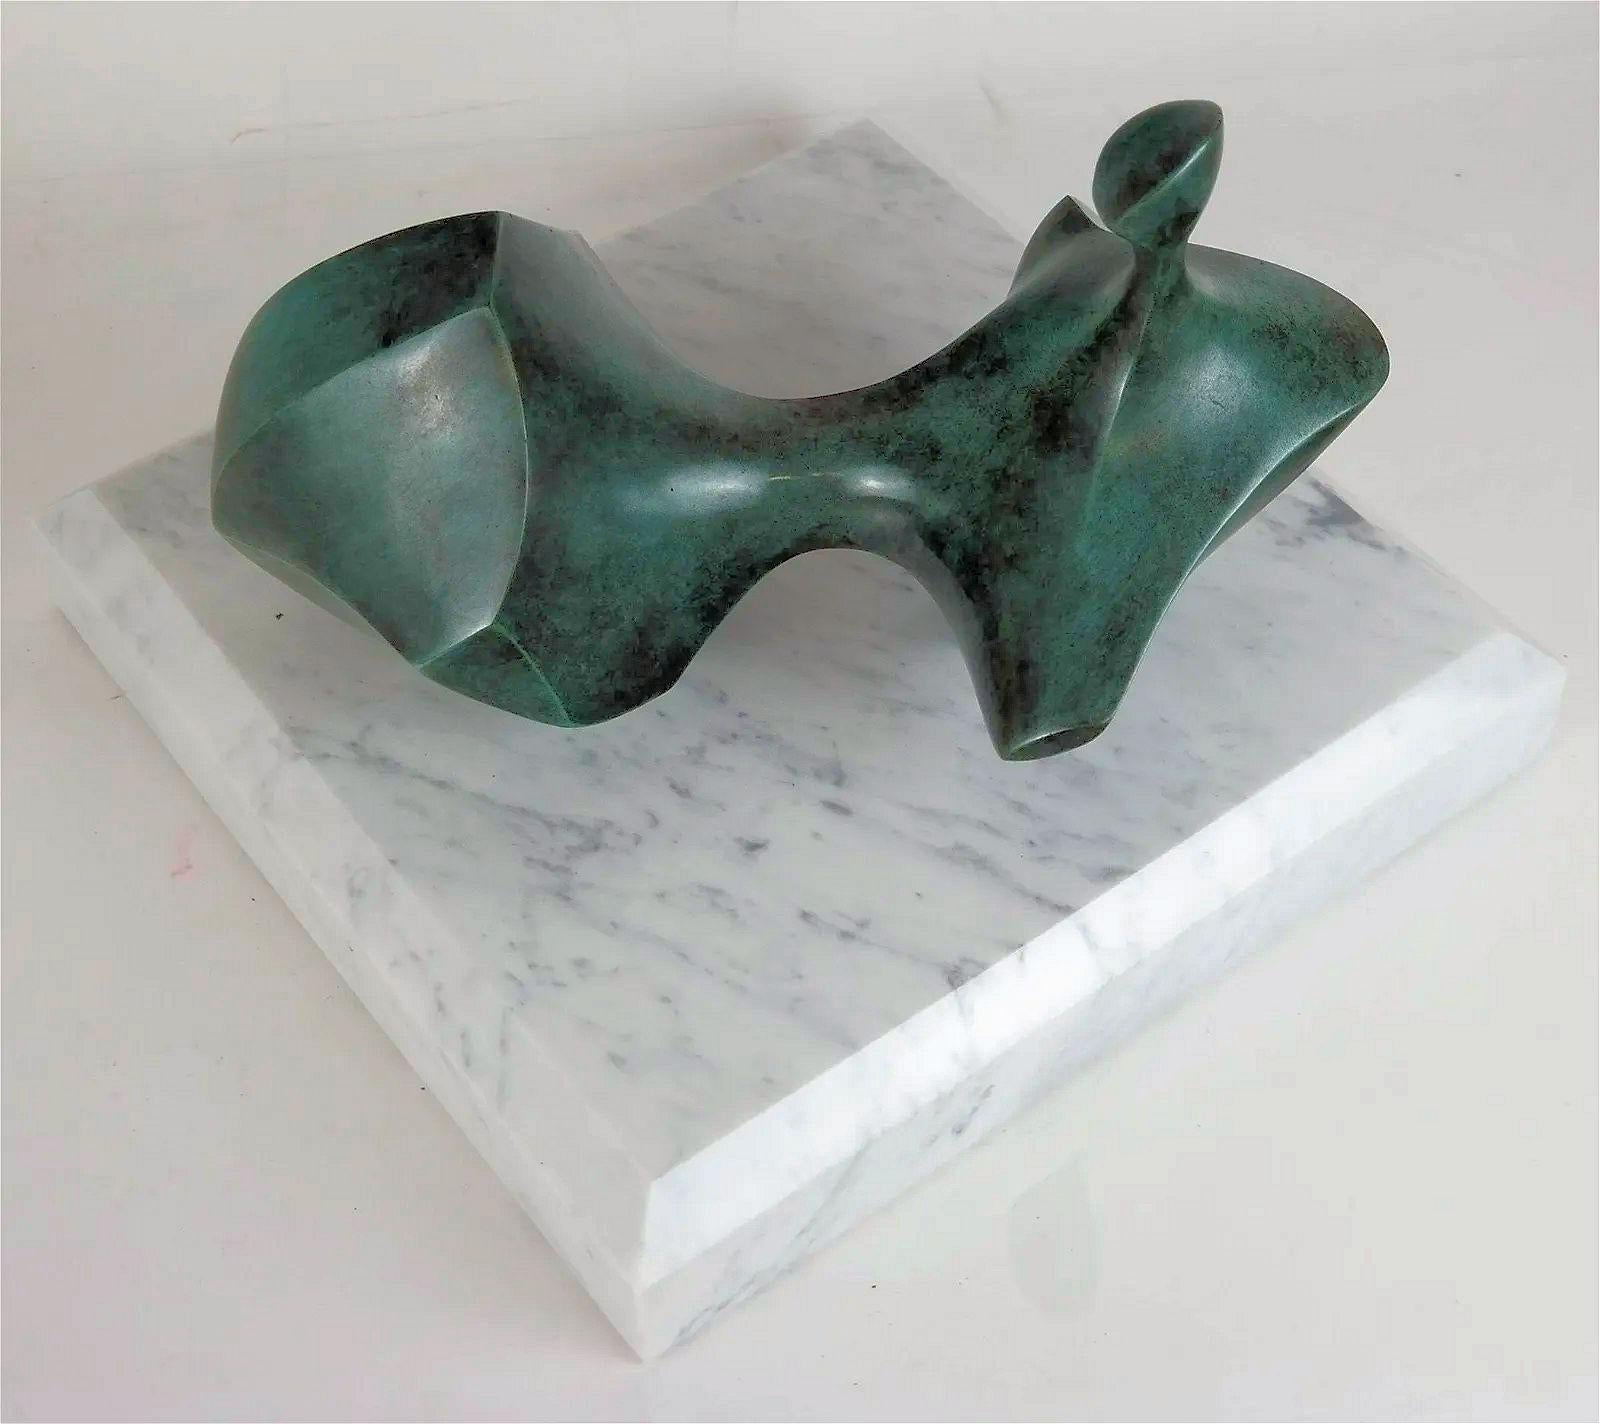 Abstract Reclining Nude Bronze Sculpture by Dick Shanley, 1 of 7 1